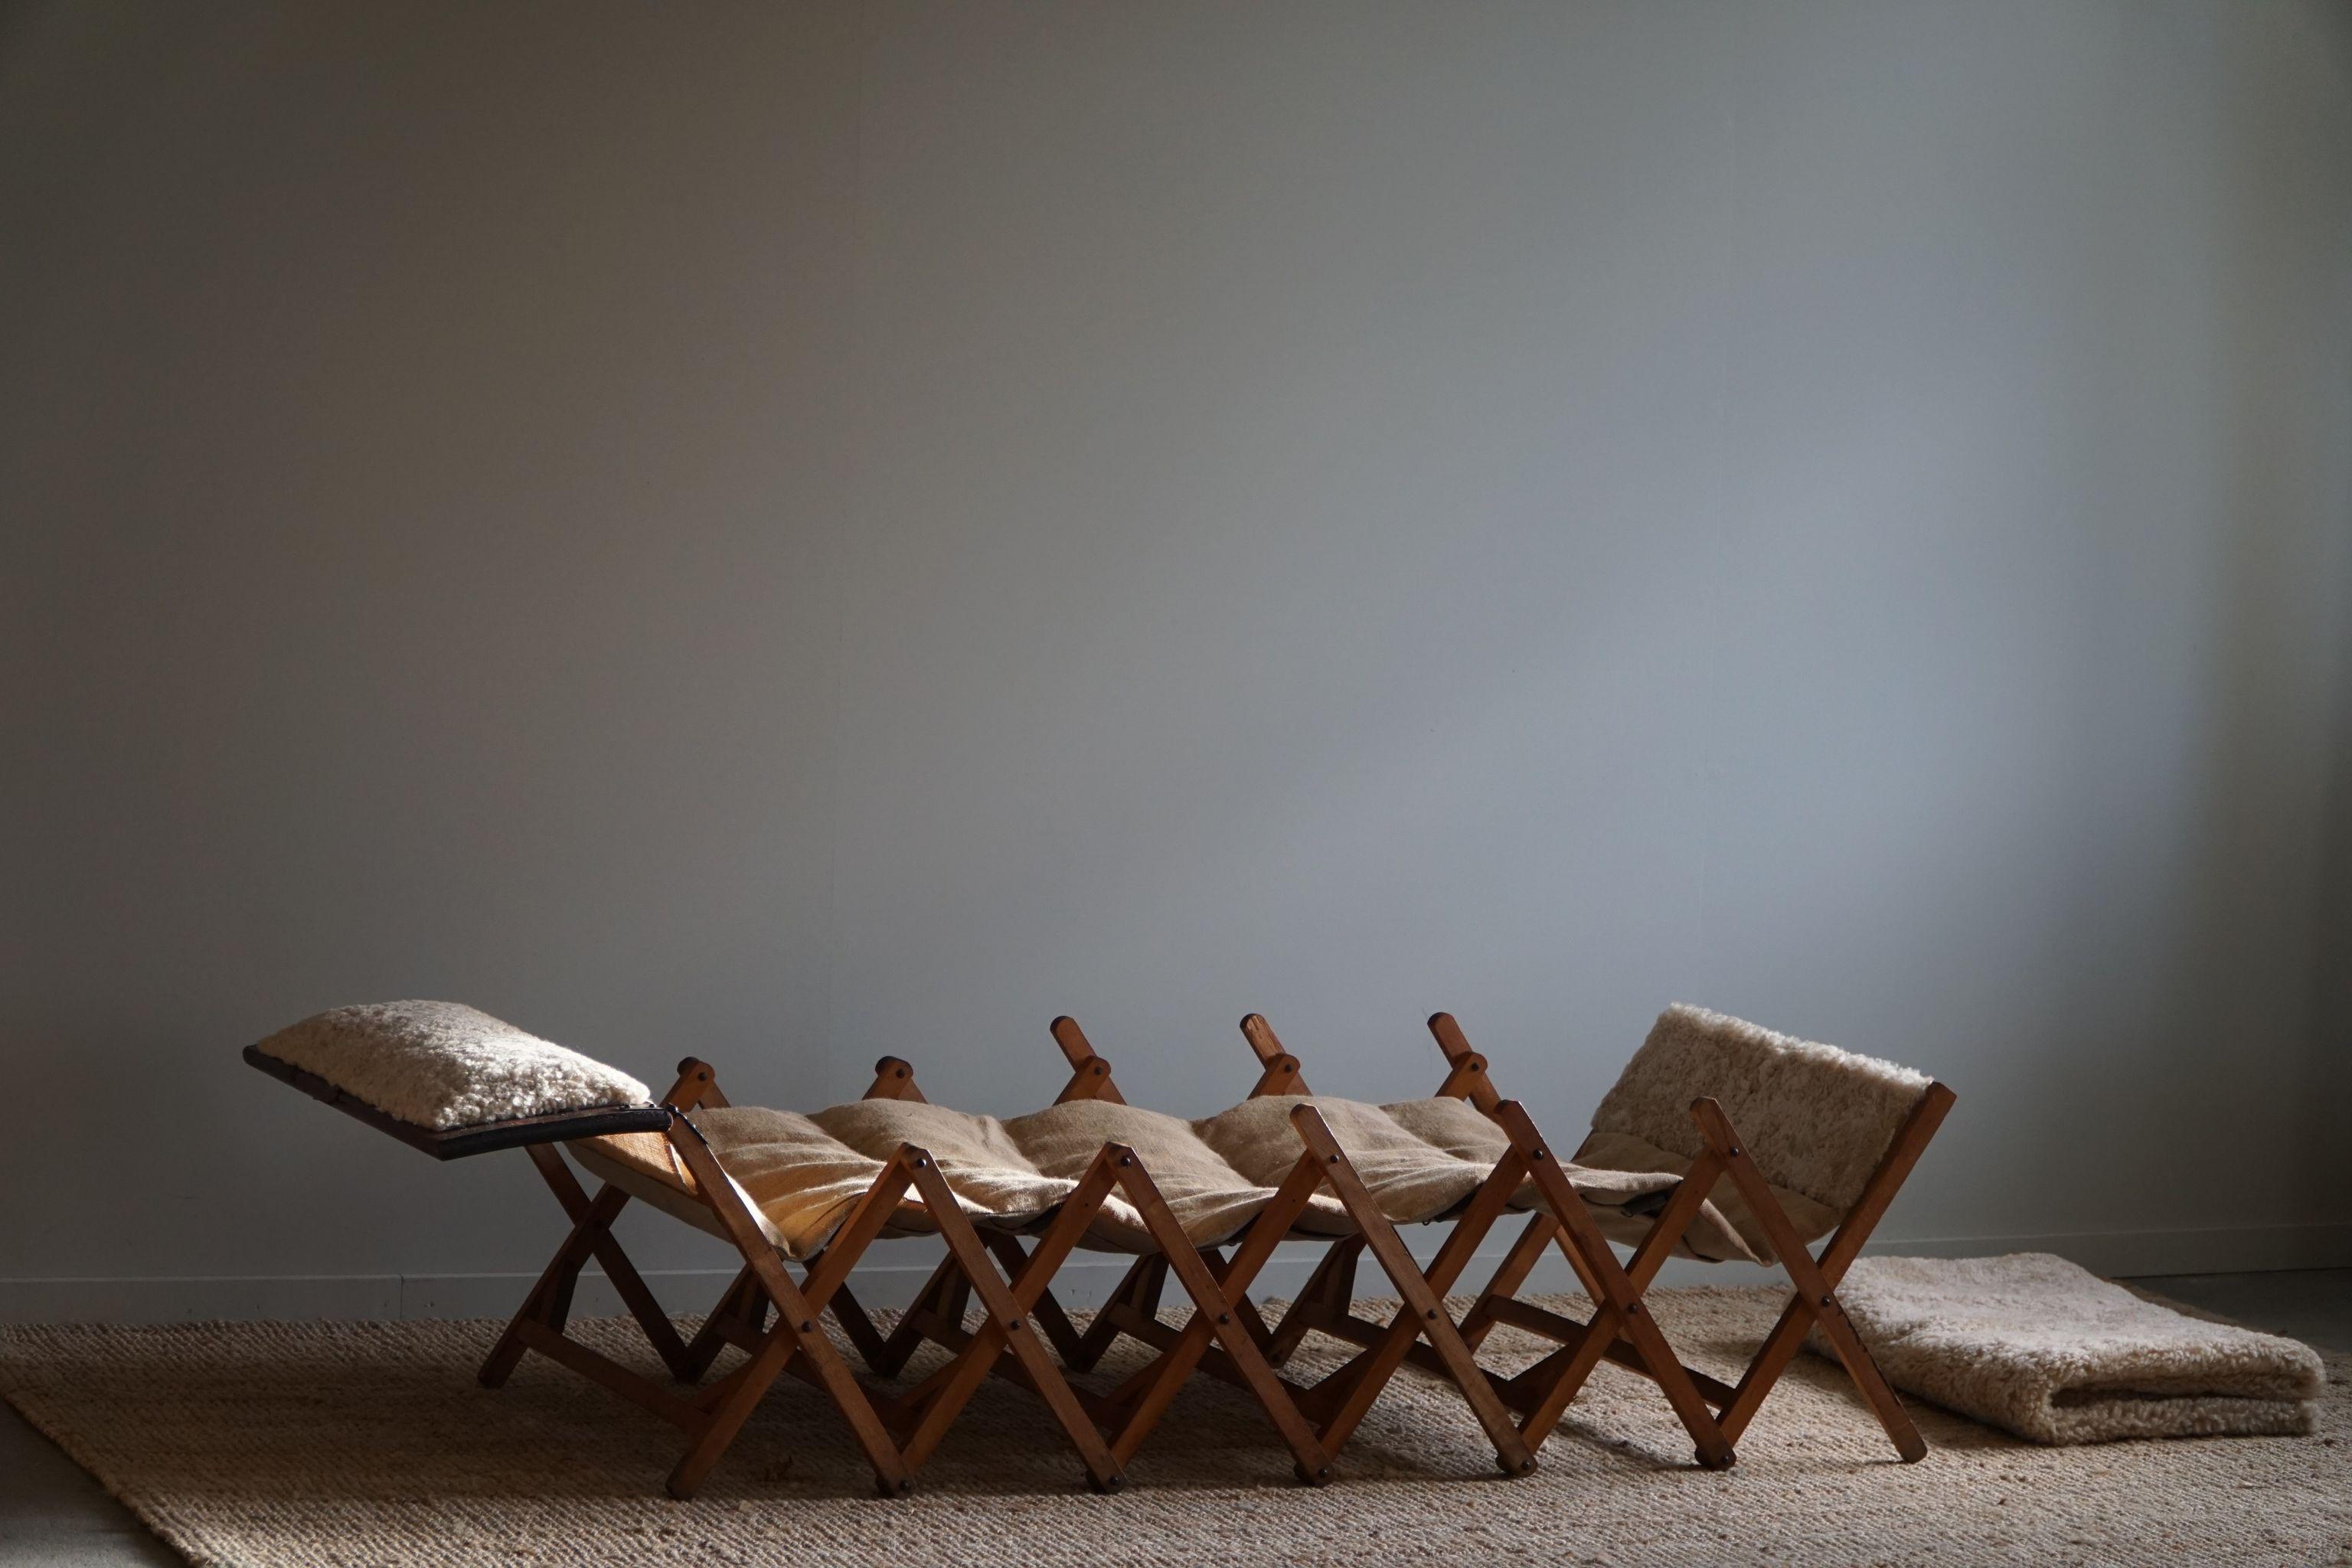 Folding Daybed in Hessian & Lambswool, Made by a Danish Cabinetmaker, 1930s For Sale 11